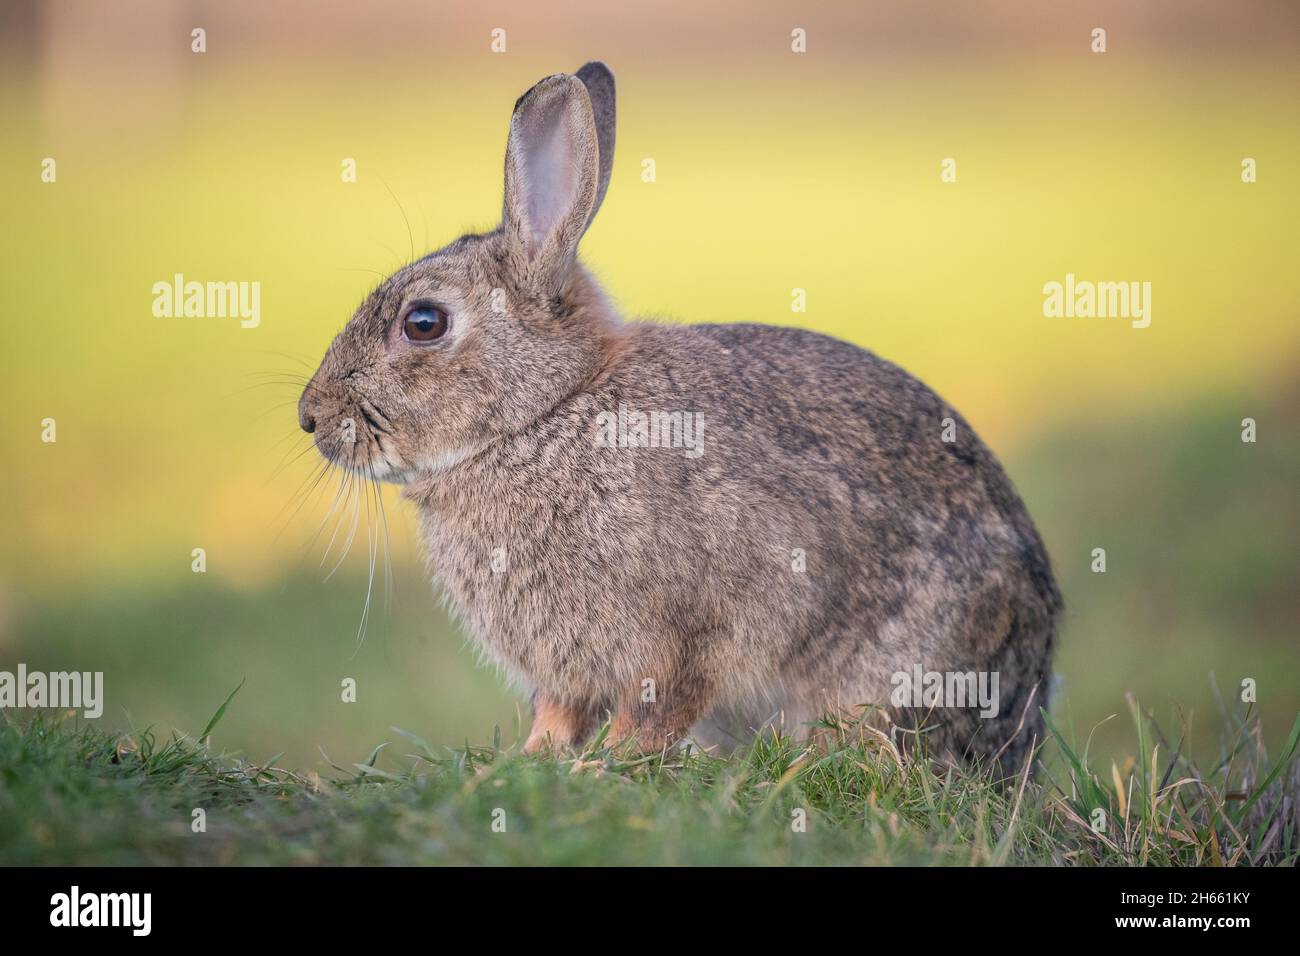 A  close up side view of a young Rabbit sitting on a natural but bright coloured background. Suffolk, UK Stock Photo